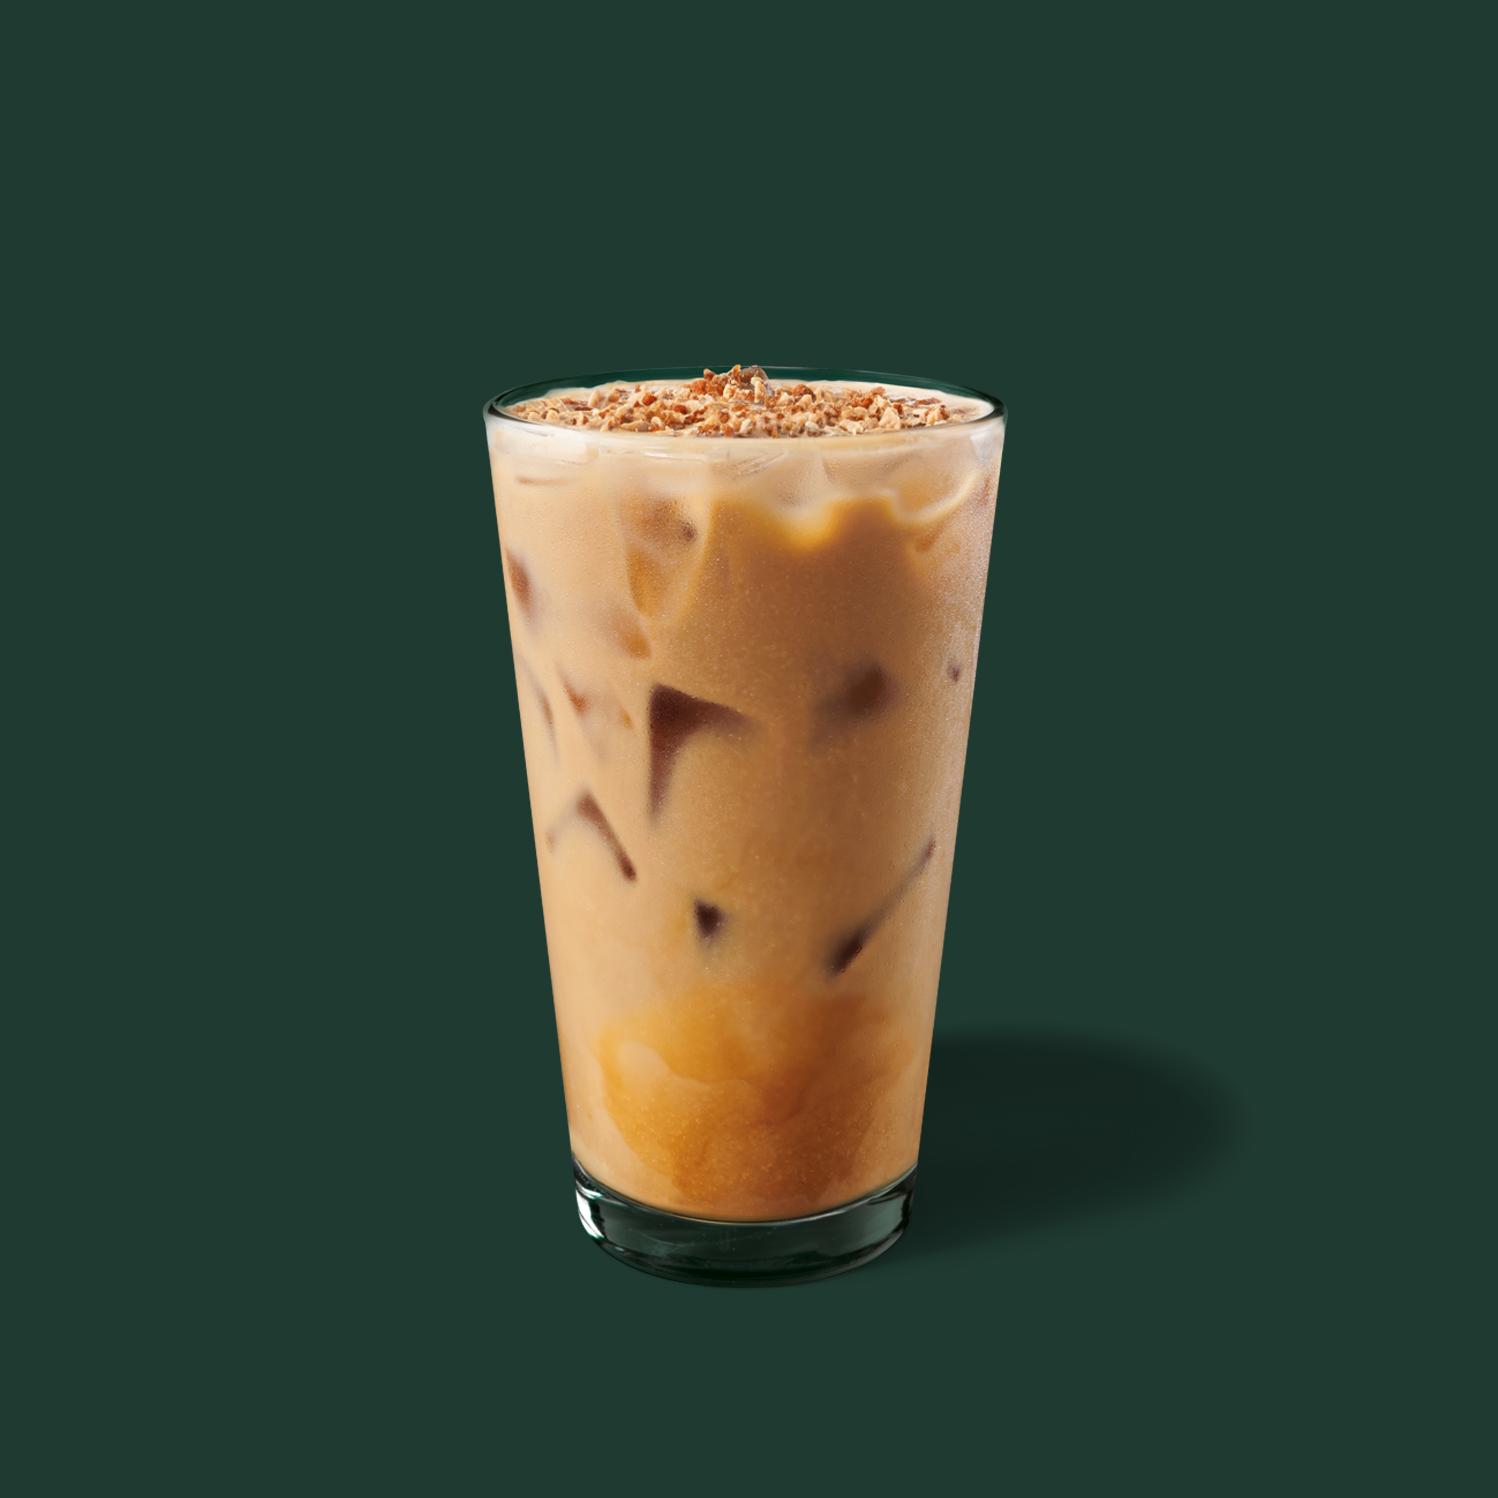  A perfect blend of espresso, milk, maple syrup, and caramel sauce.